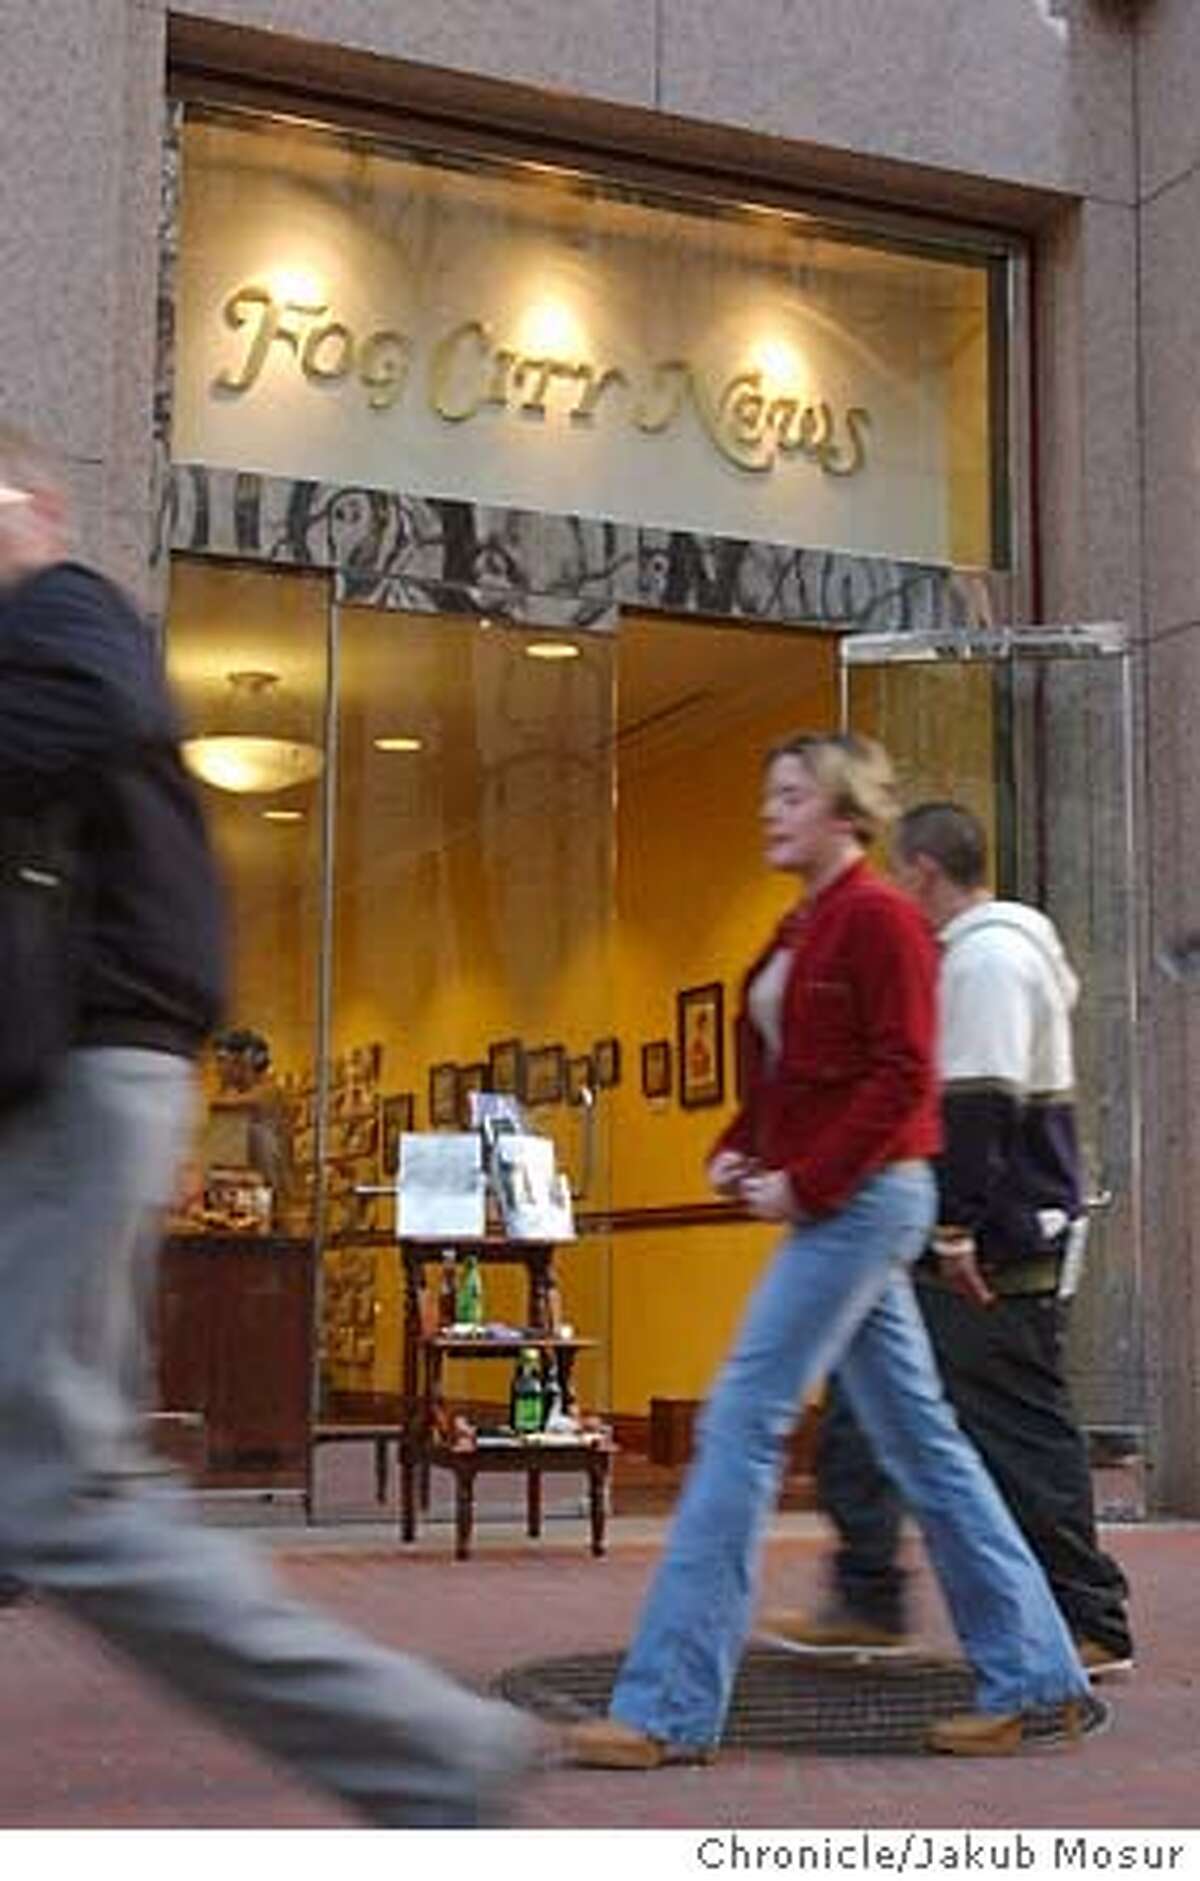 People walk in front of Fog City News, owned by Adam Smith, sells newspapers, magazines, and imported chocolate in the financial district in San Francisco on Thursday, Jan. 8, 2004. Event on 1/8/04 in San Francisco. JAKUB MOSUR / The Chronicle